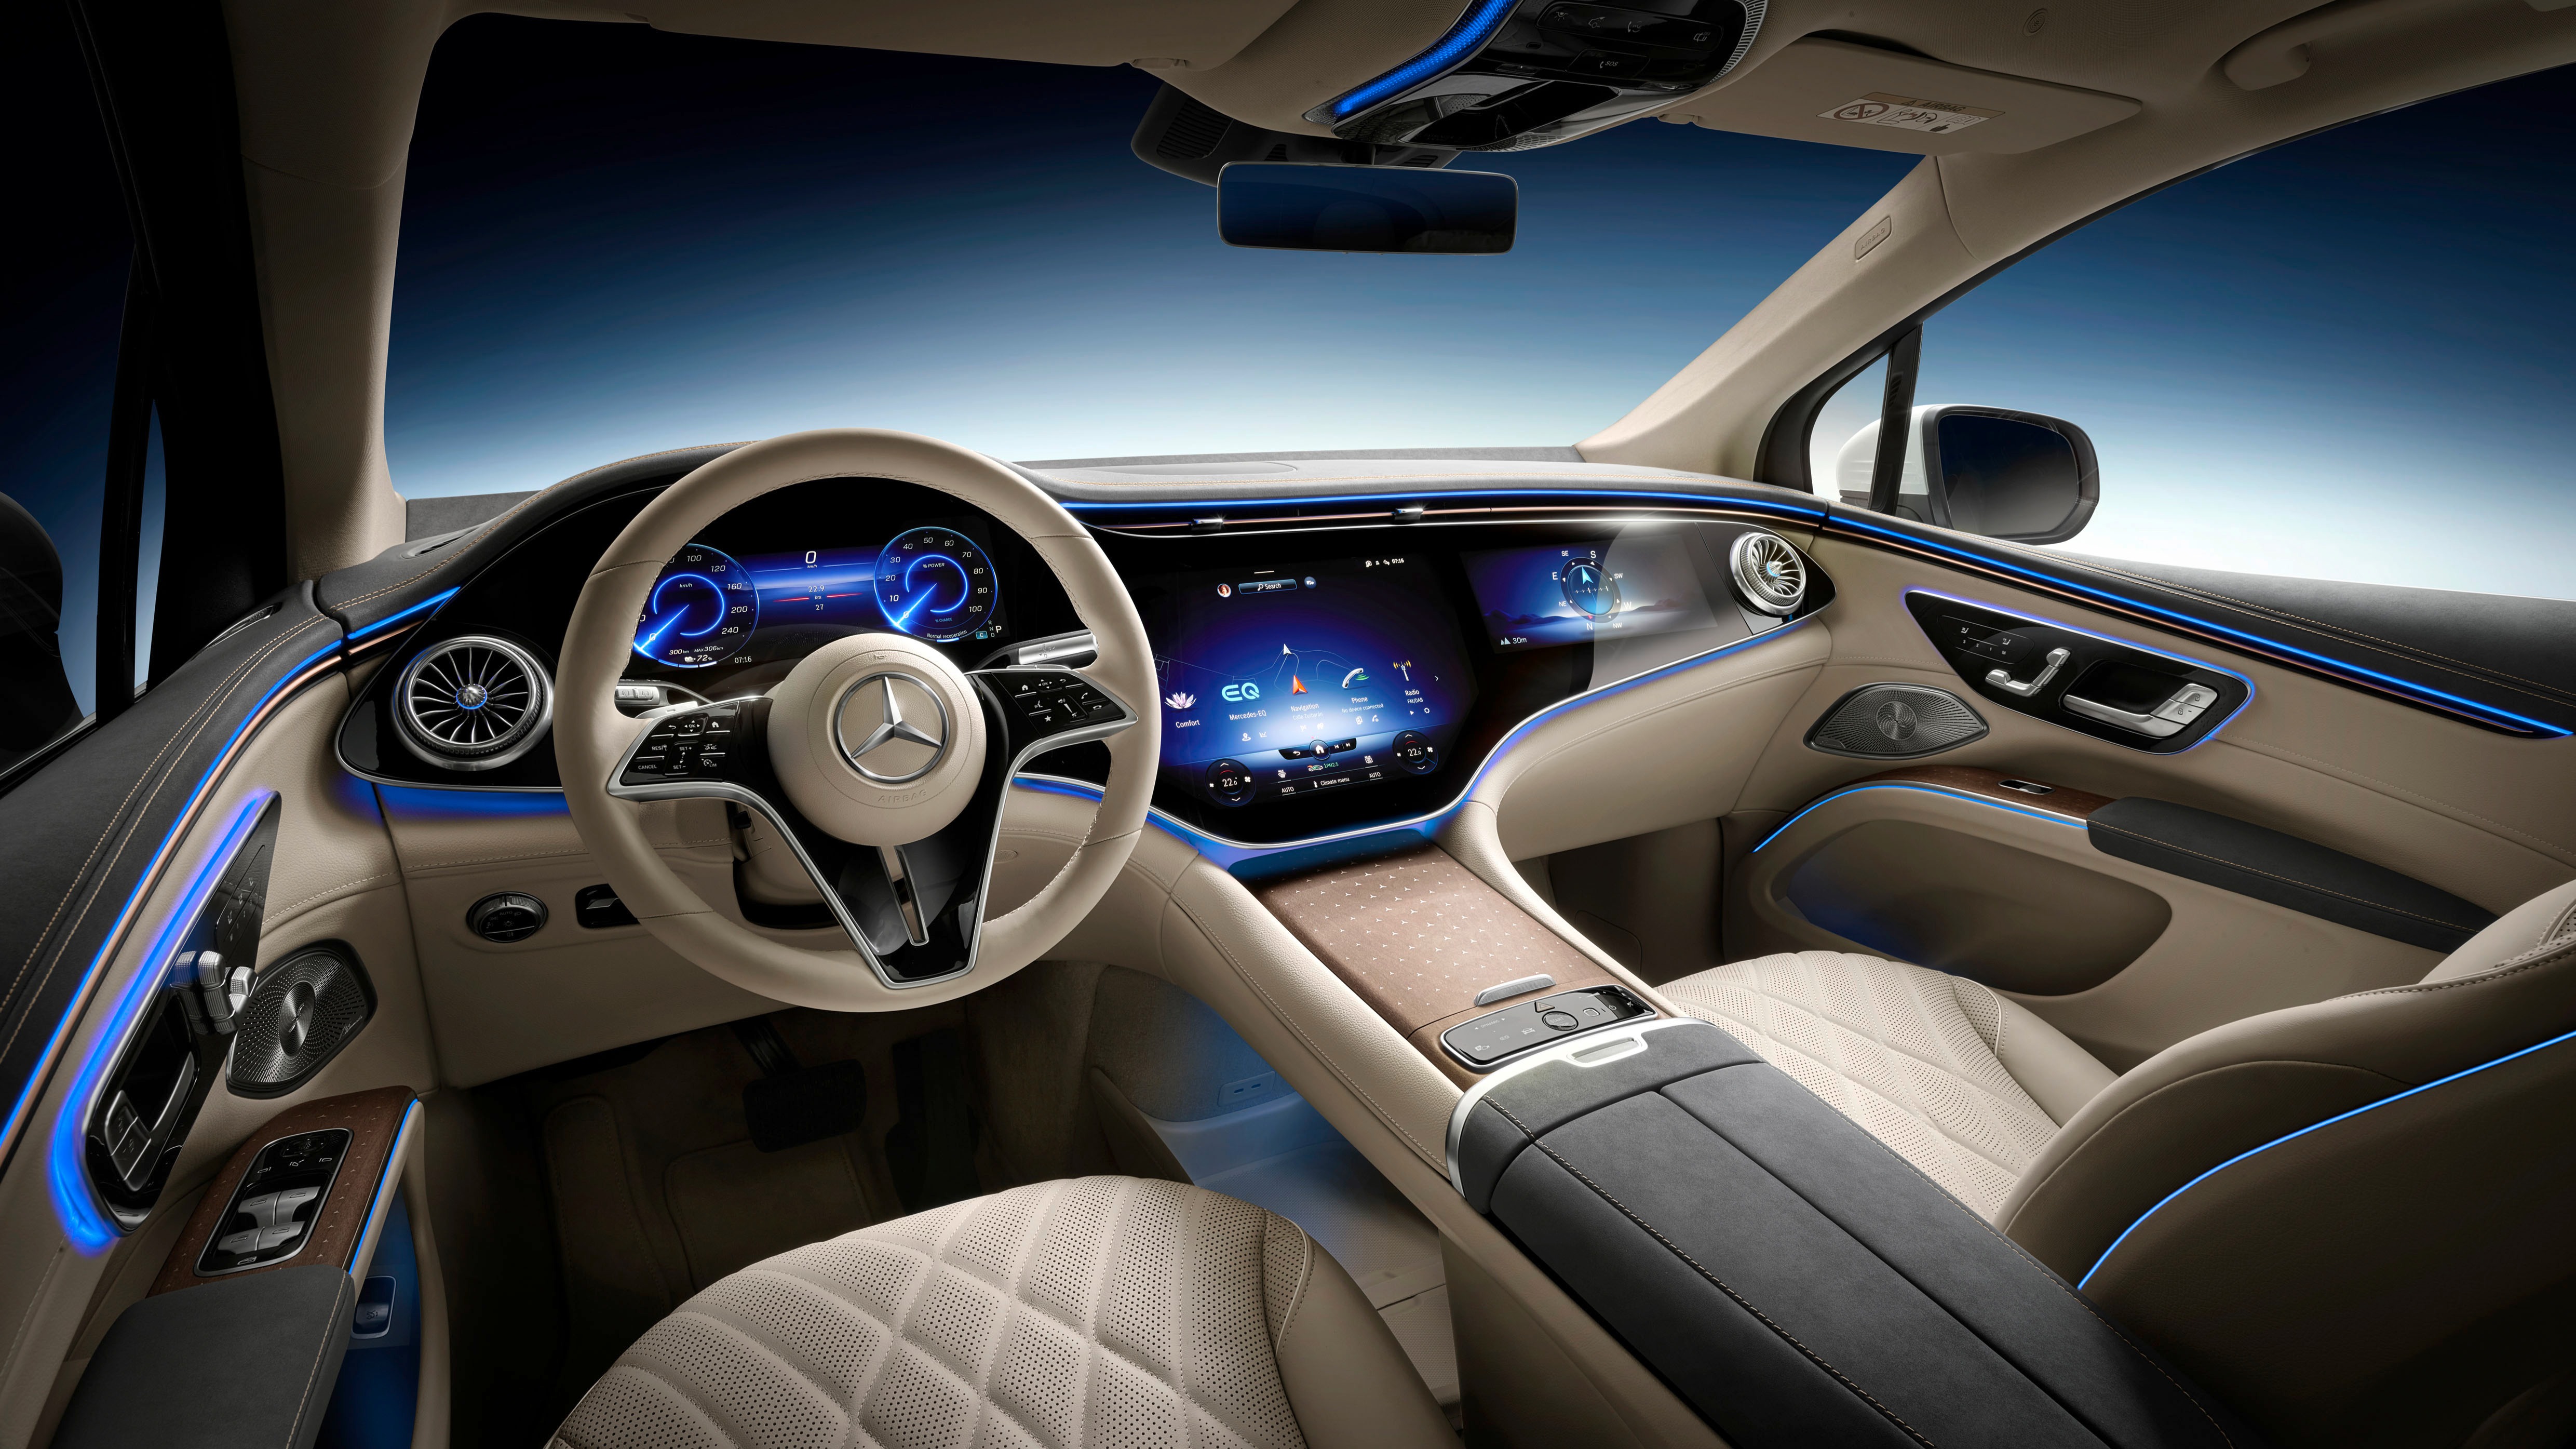 The interior of the Mercedes EQS SUV